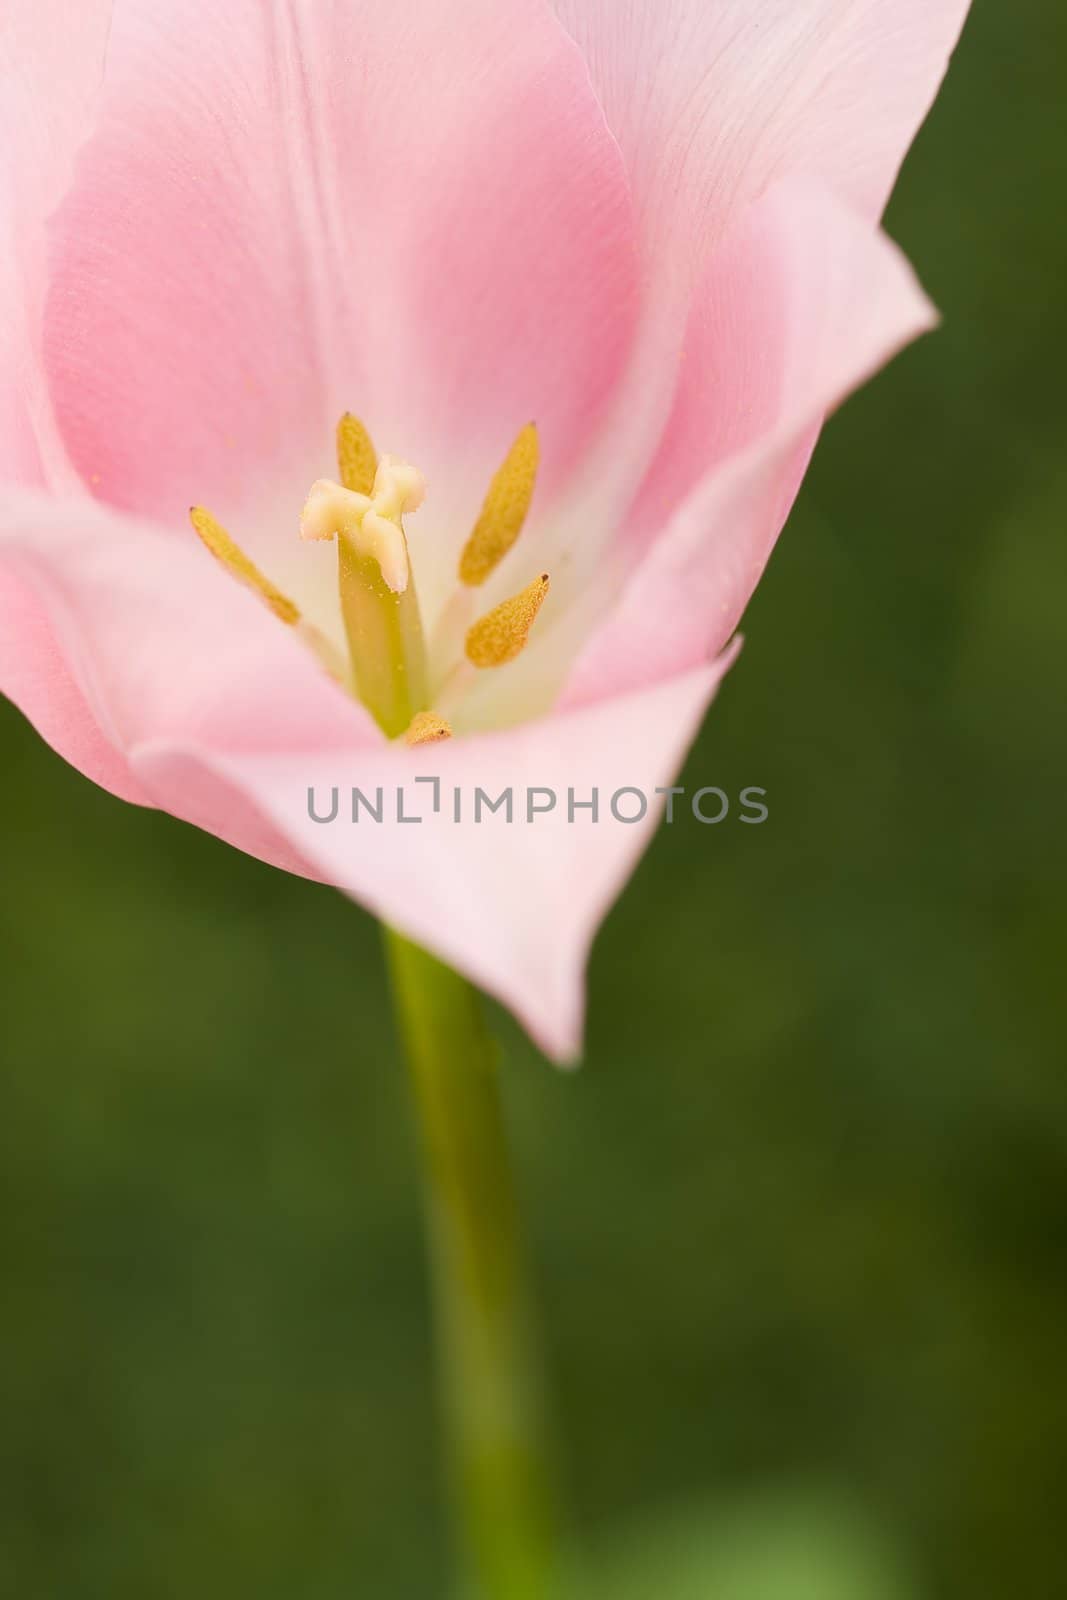 delicate pink lile tulip on a green background growing in the garden